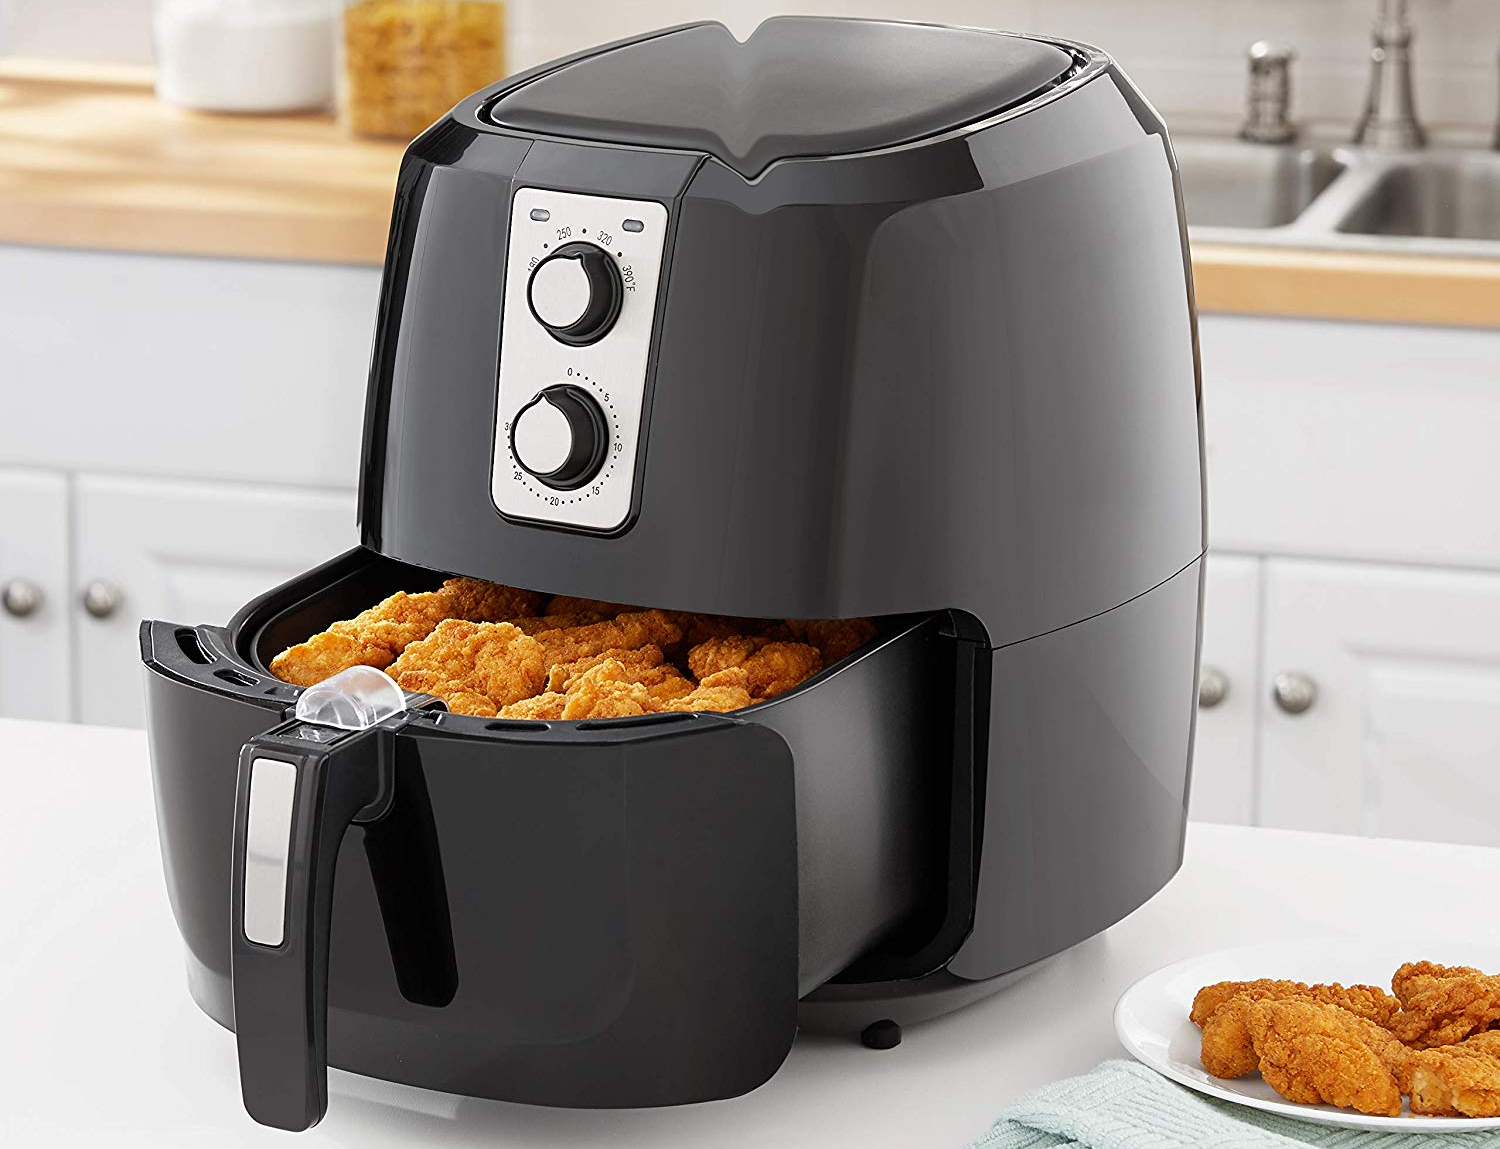 This best-selling lavender air fryer is finally back in stock at Walmart,  and it's less than $100